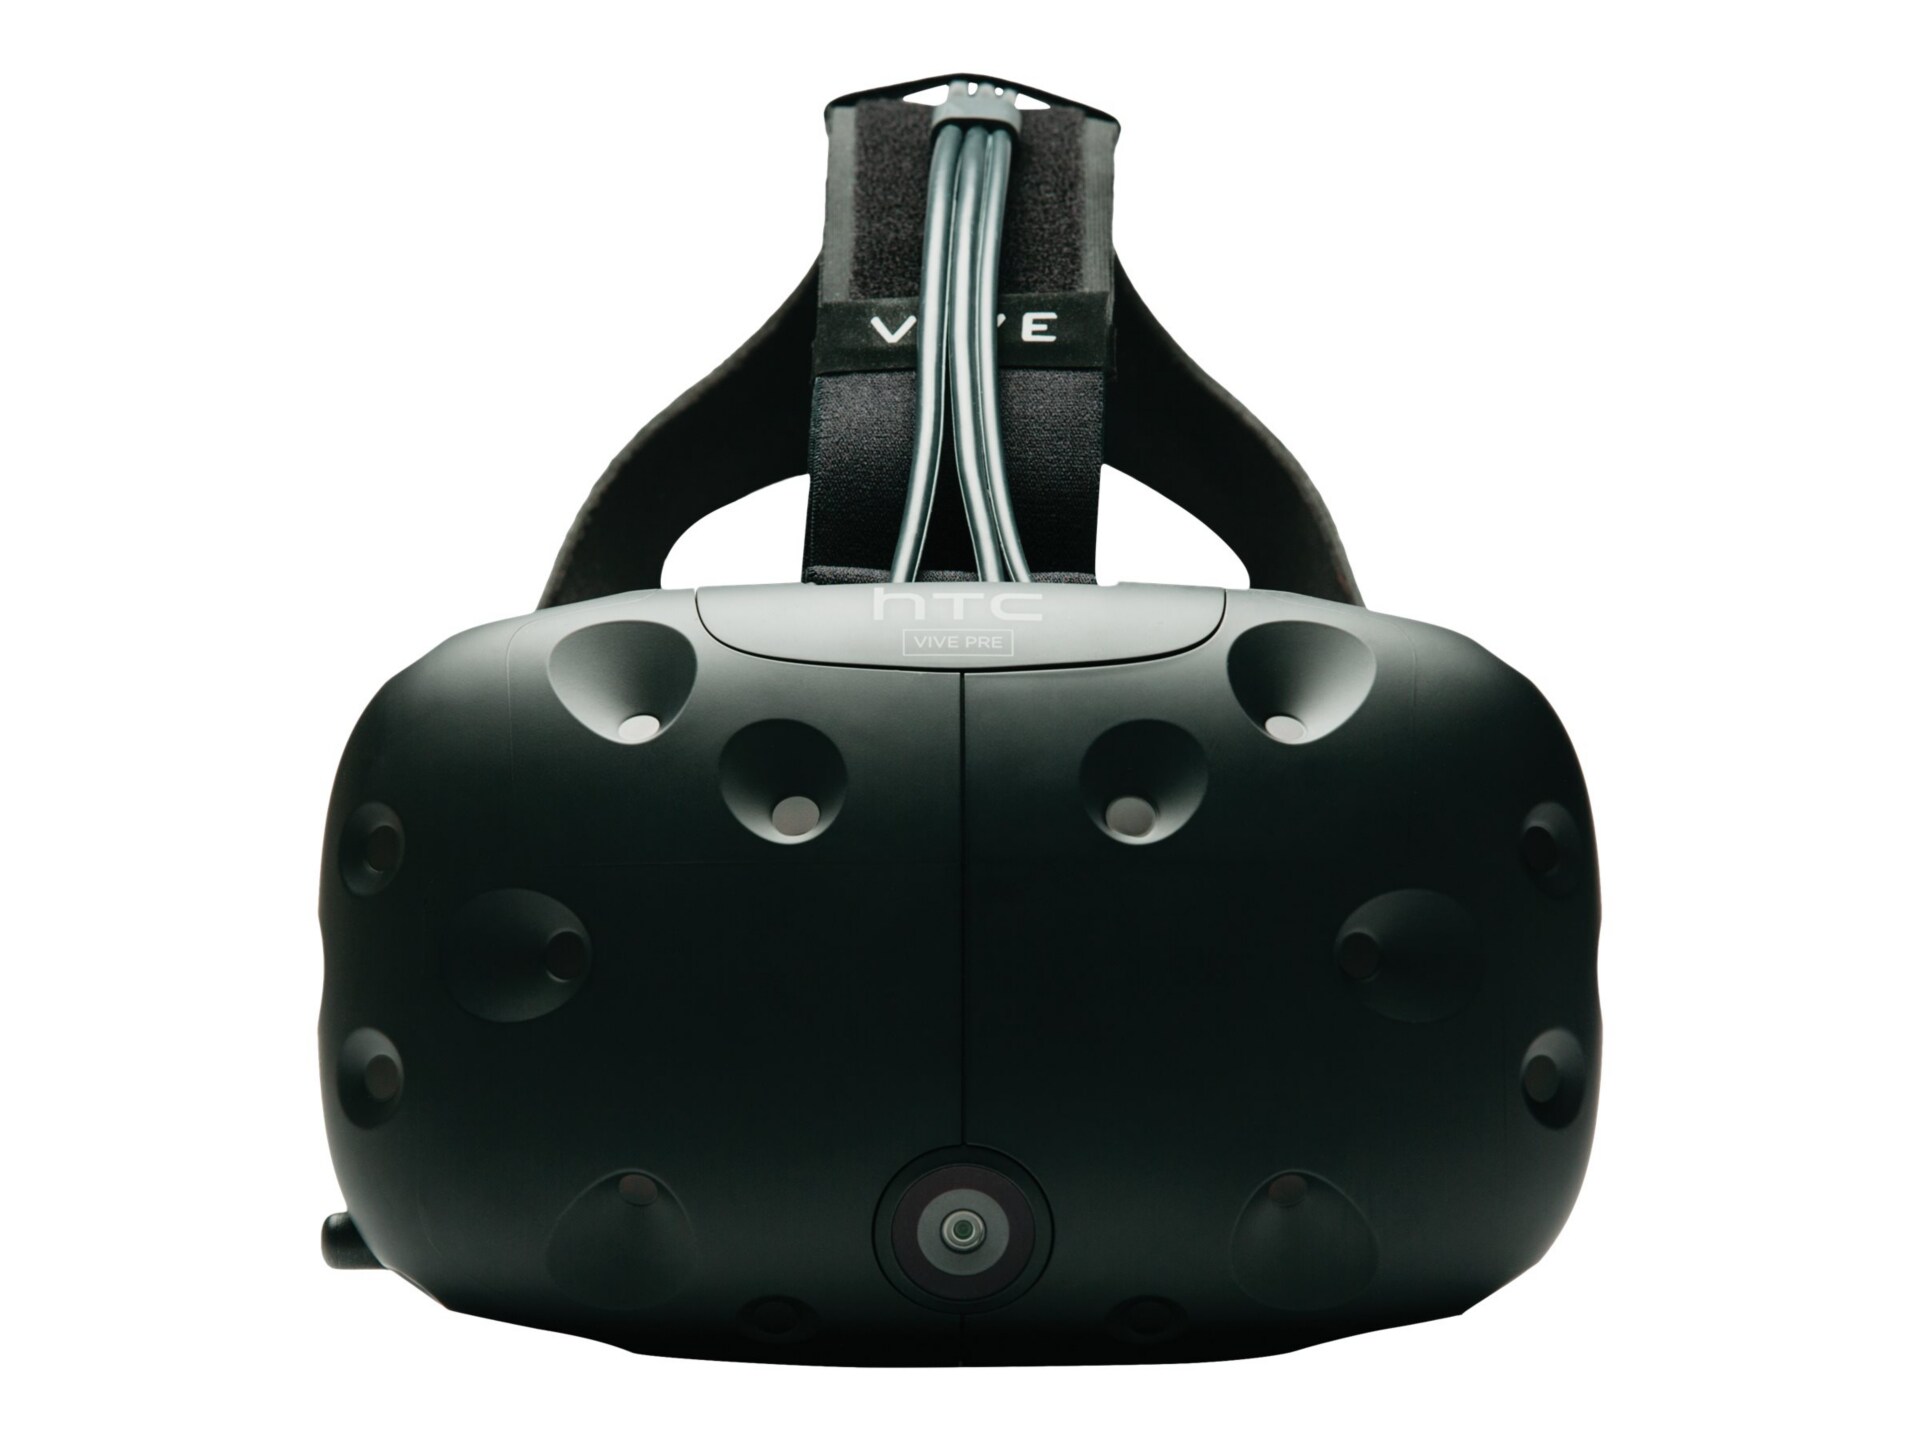 HTC VIVE Business Edition - 3D virtual reality headset - Smart Buy